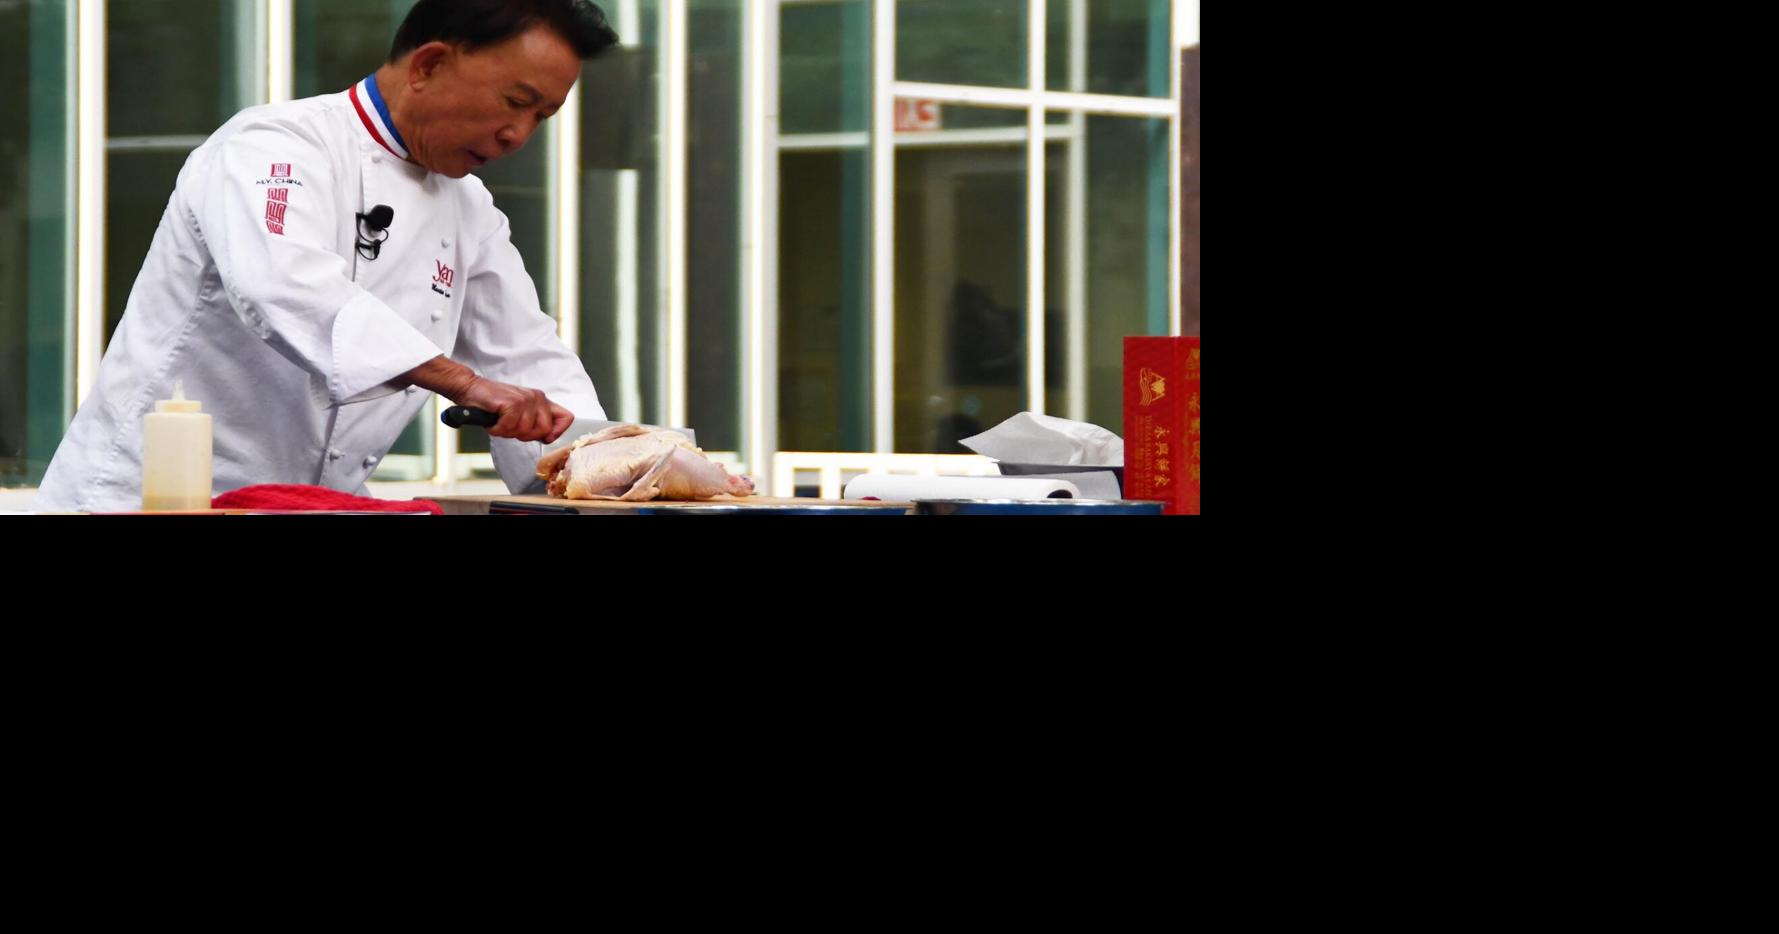 The PBS Chef Martin Yan Teaches Chinese Cooking to a New Audience